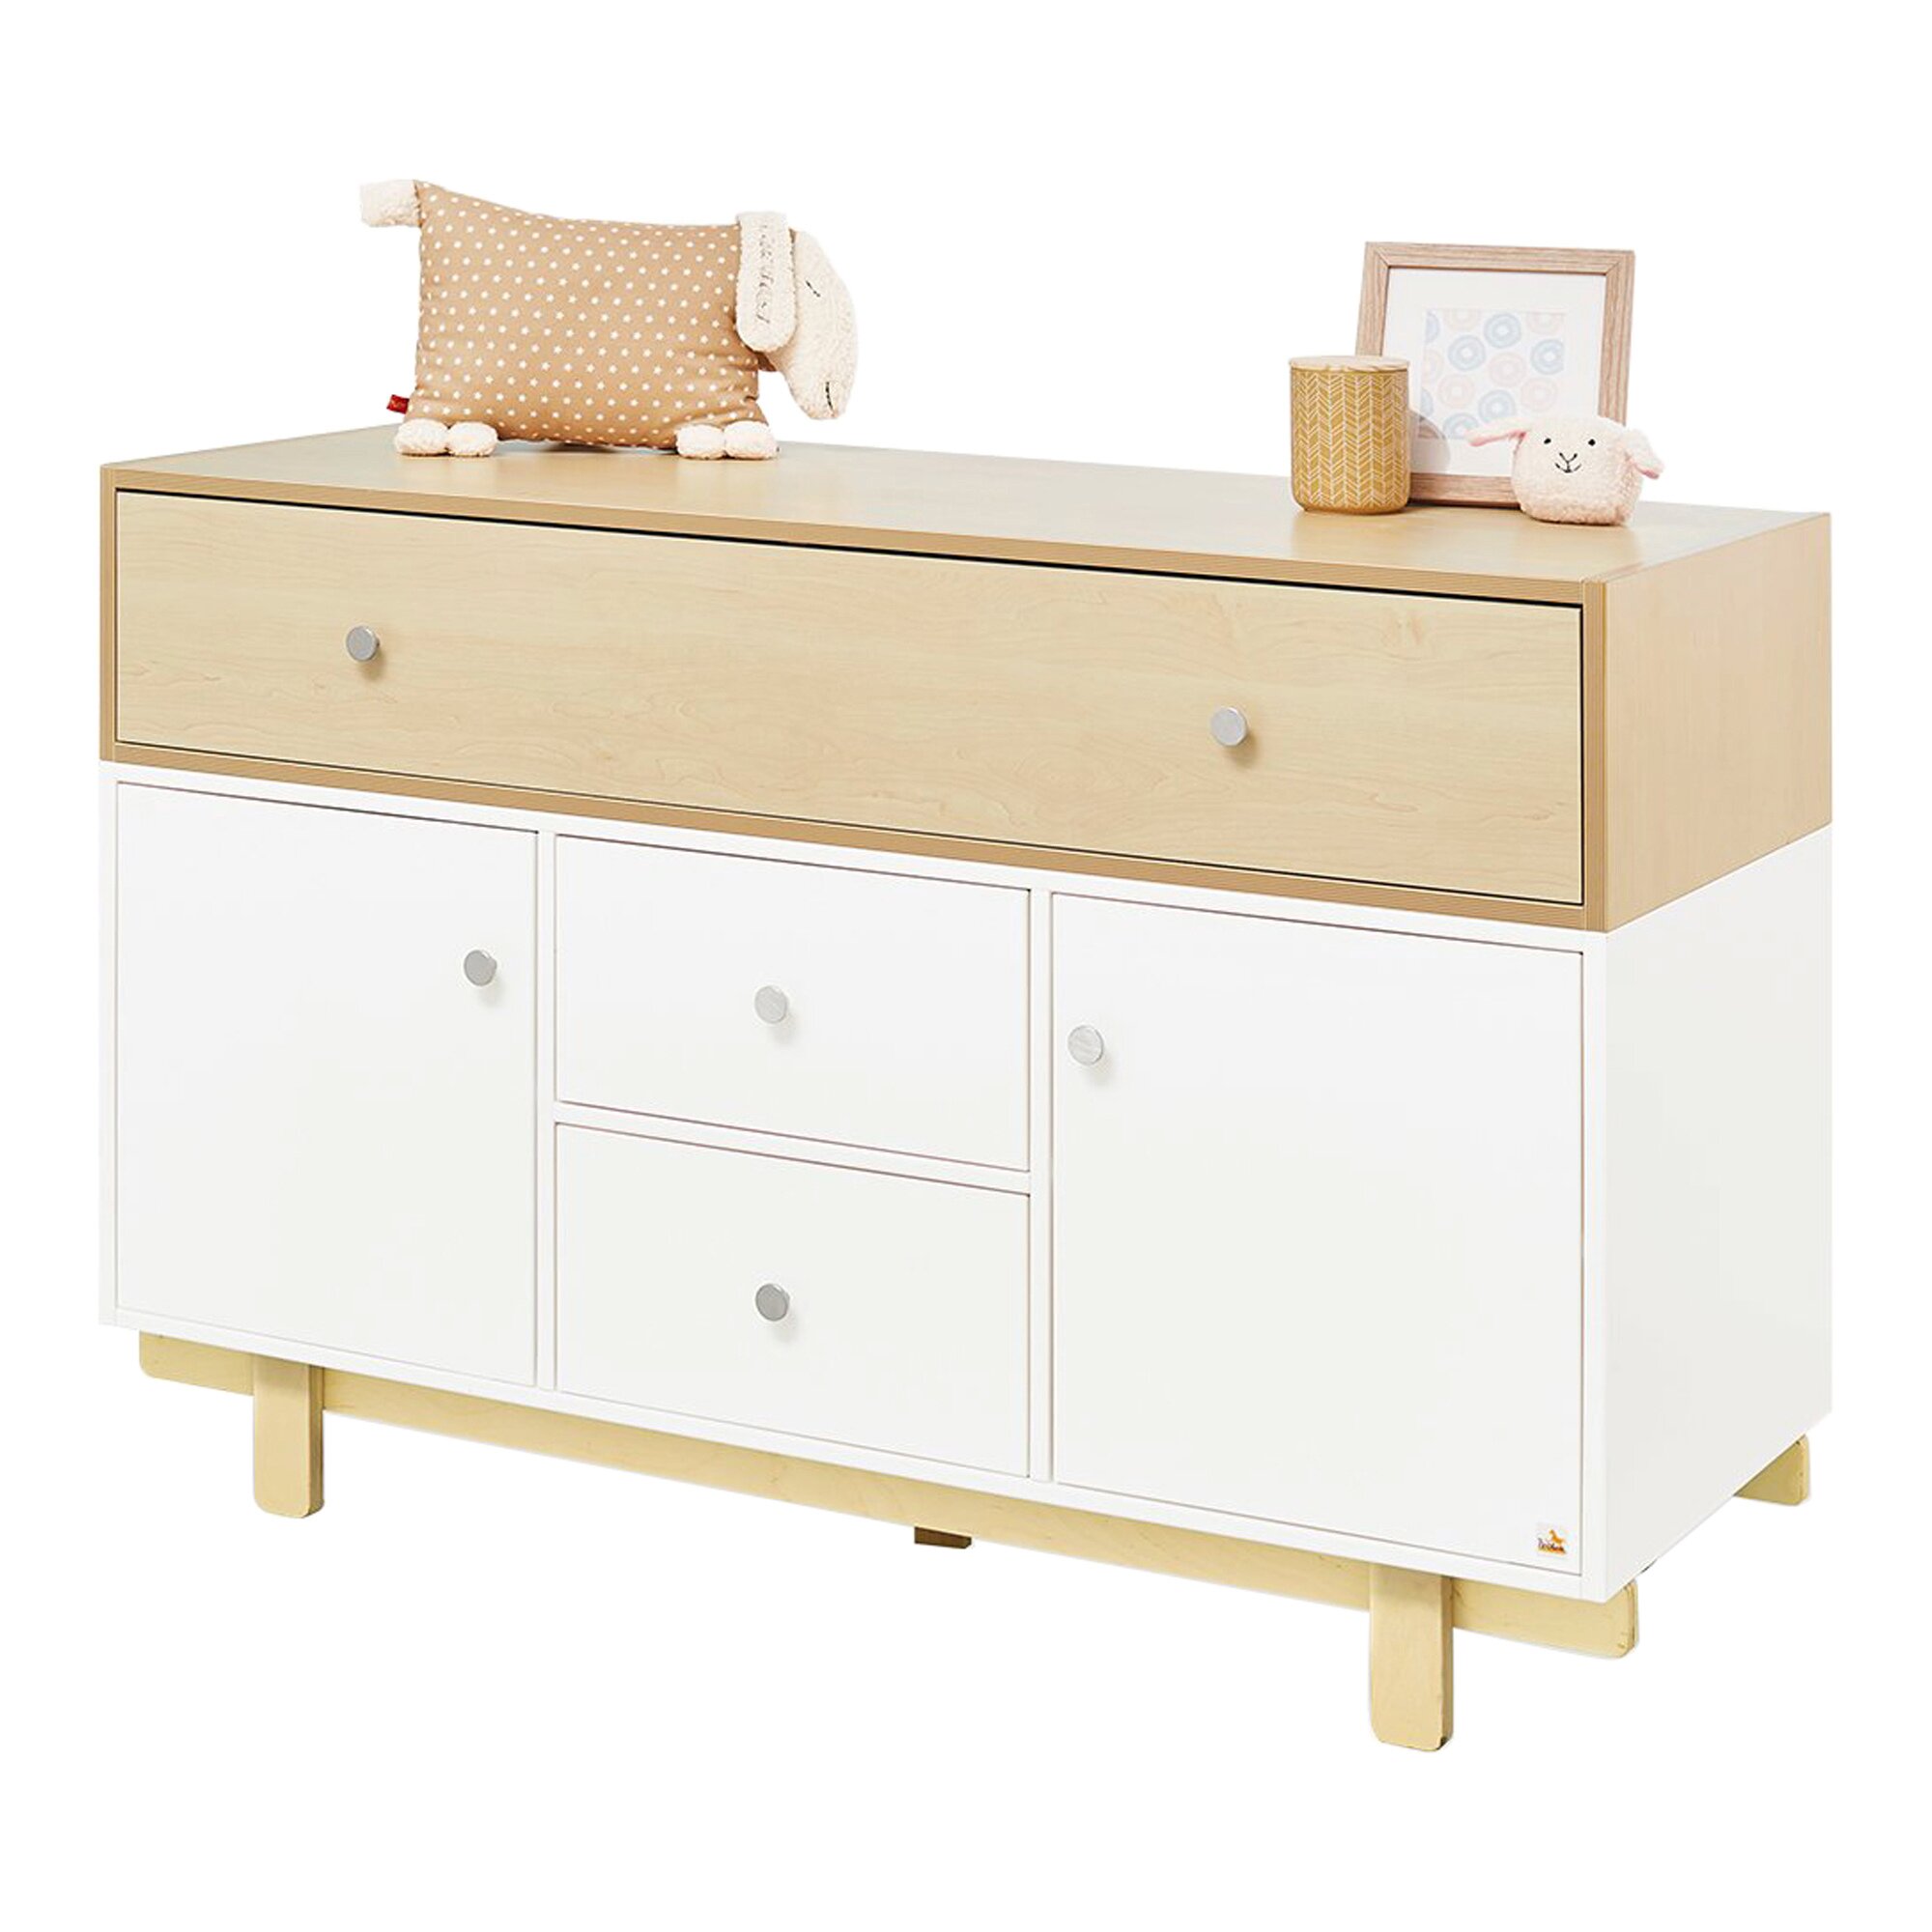 Boks Changing Table brown,white